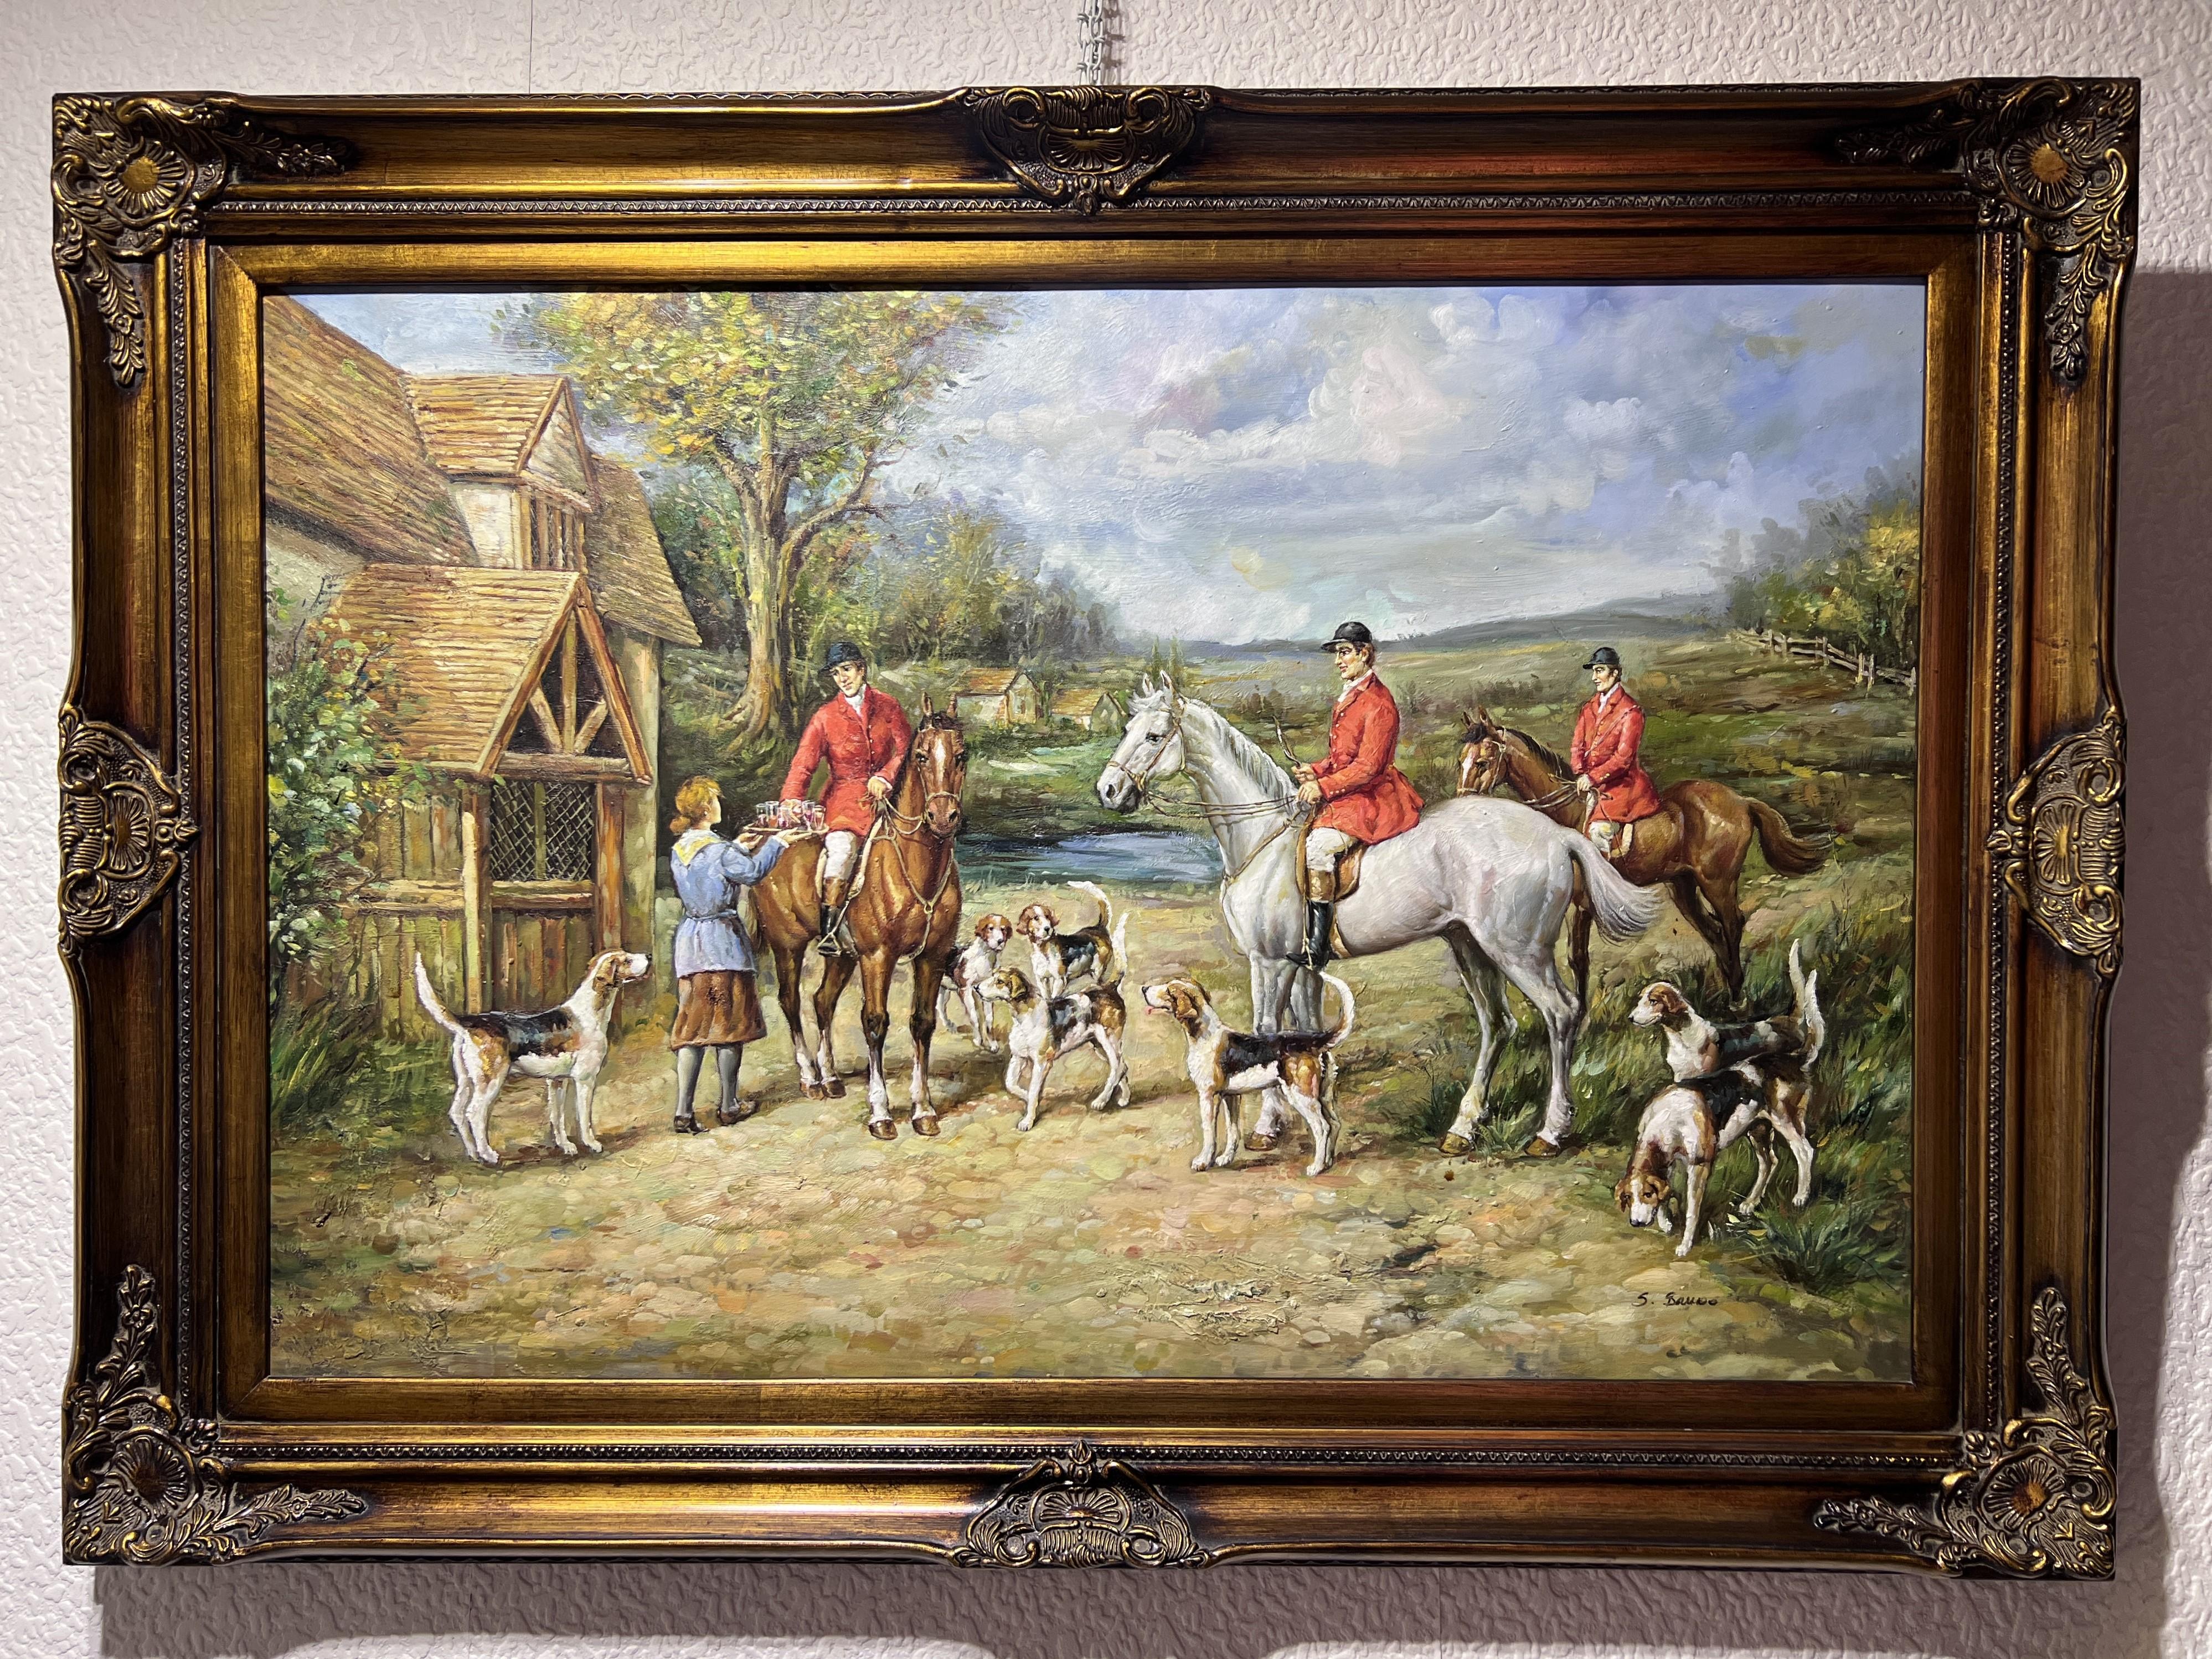 S.Bruno original Large oil painting on canvas, English Hunting scene, Gold Frame For Sale 1